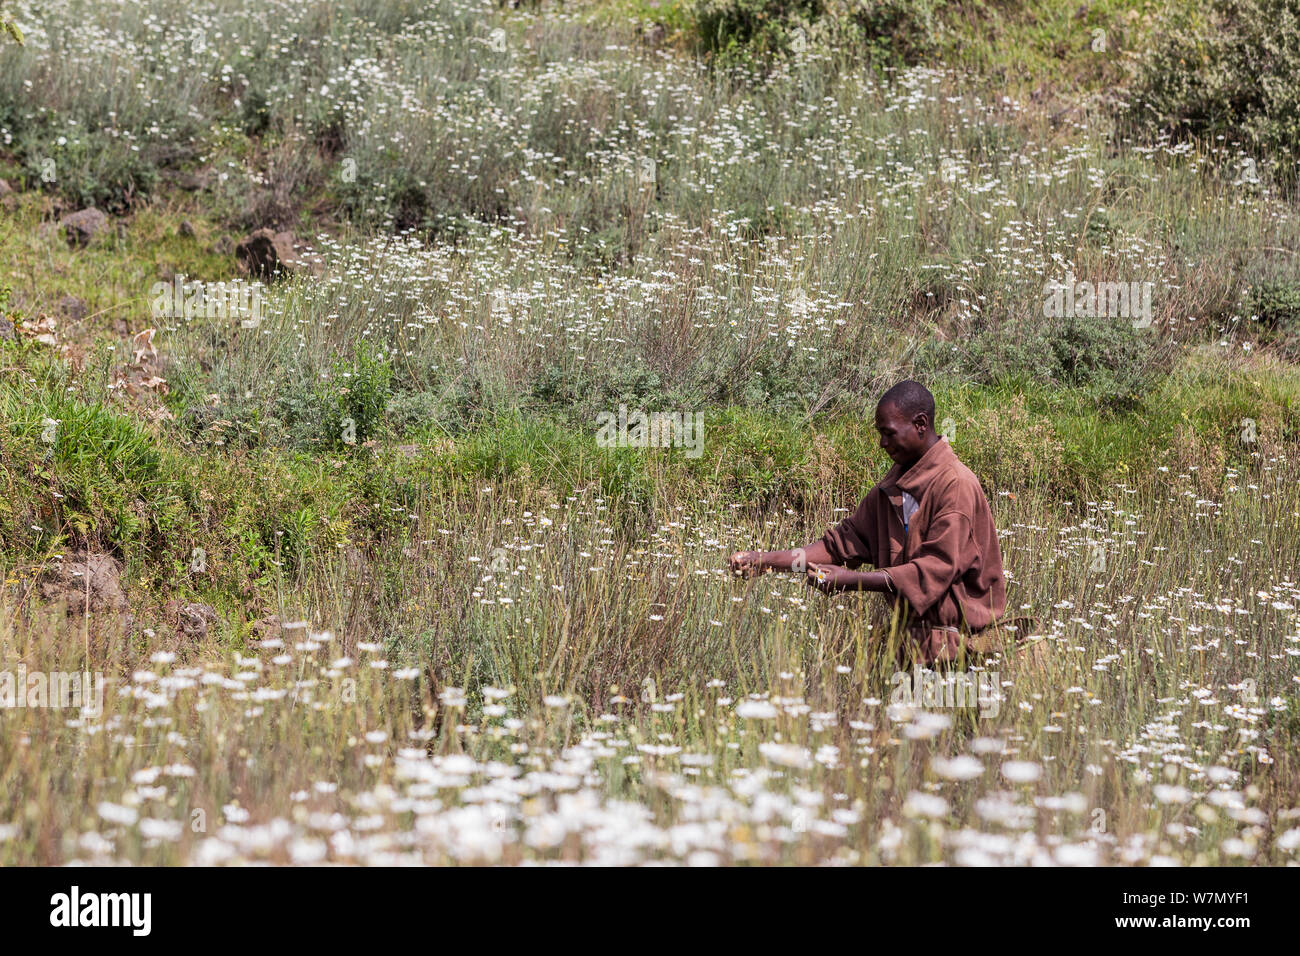 Man harvesting Pyrethrum, which refers to several Old World plants of the Chrysanthemum genus which are cultivated as ornamentals for their showy flower heads. Pyrethrum is also the name of a natural insecticide made from the dried flower heads of C. cinerariifolium  Rwanda Stock Photo